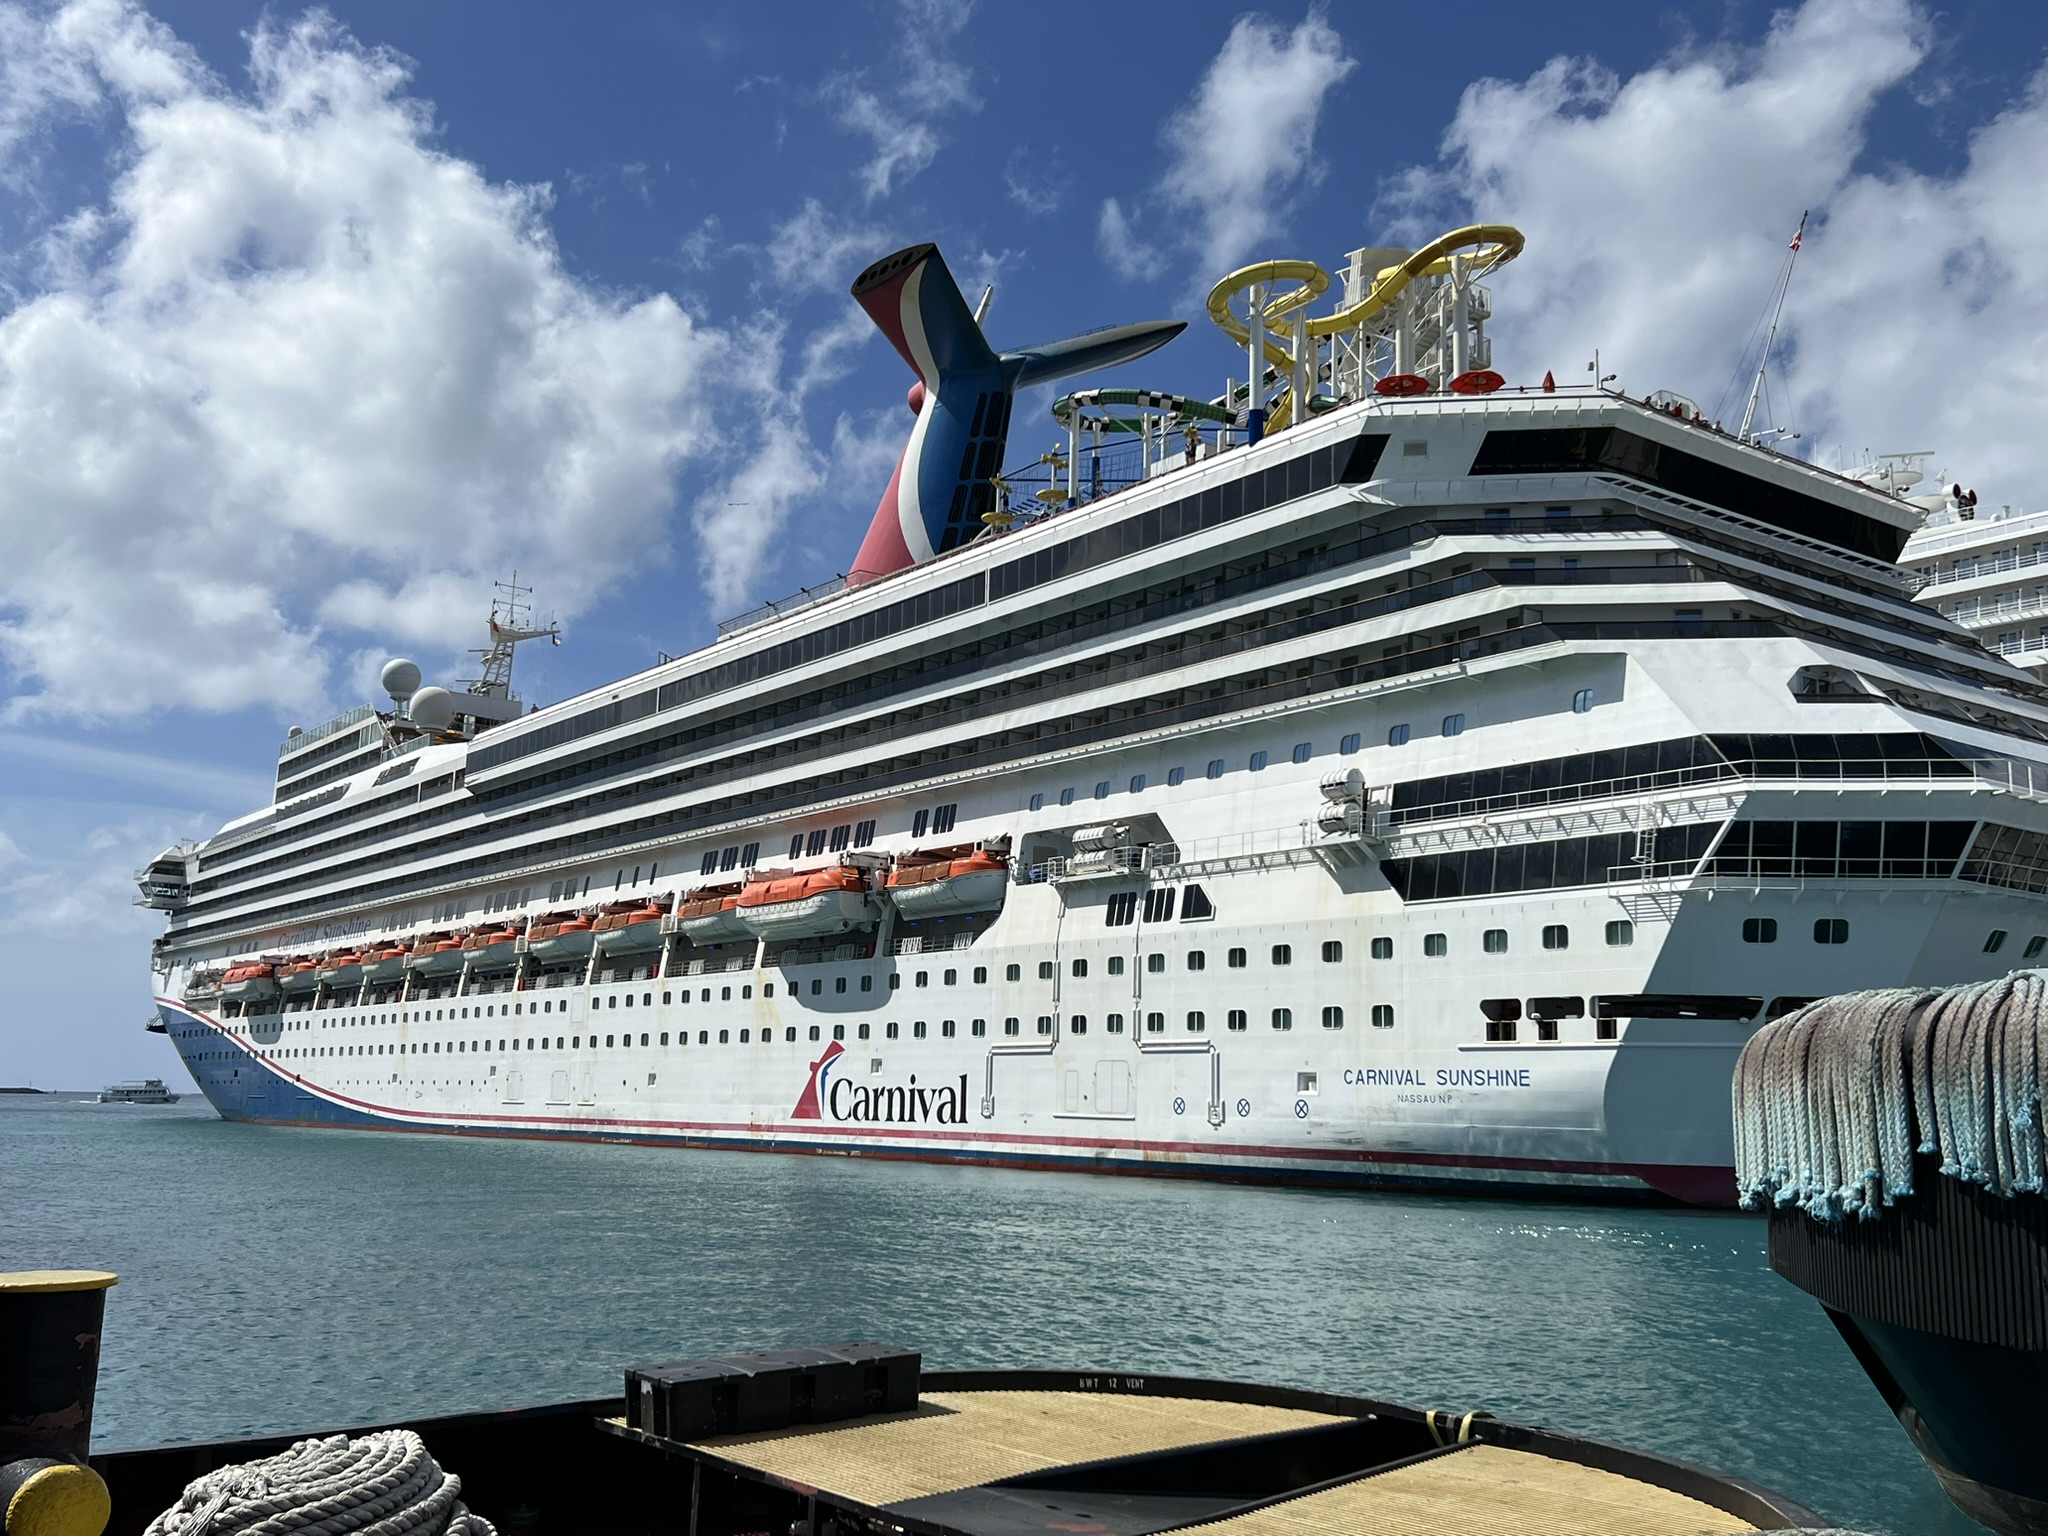 Cruise Ship Reviews - Cruise Ship Carnival Sunshine Review Including Likes and Dislikes of the Ship